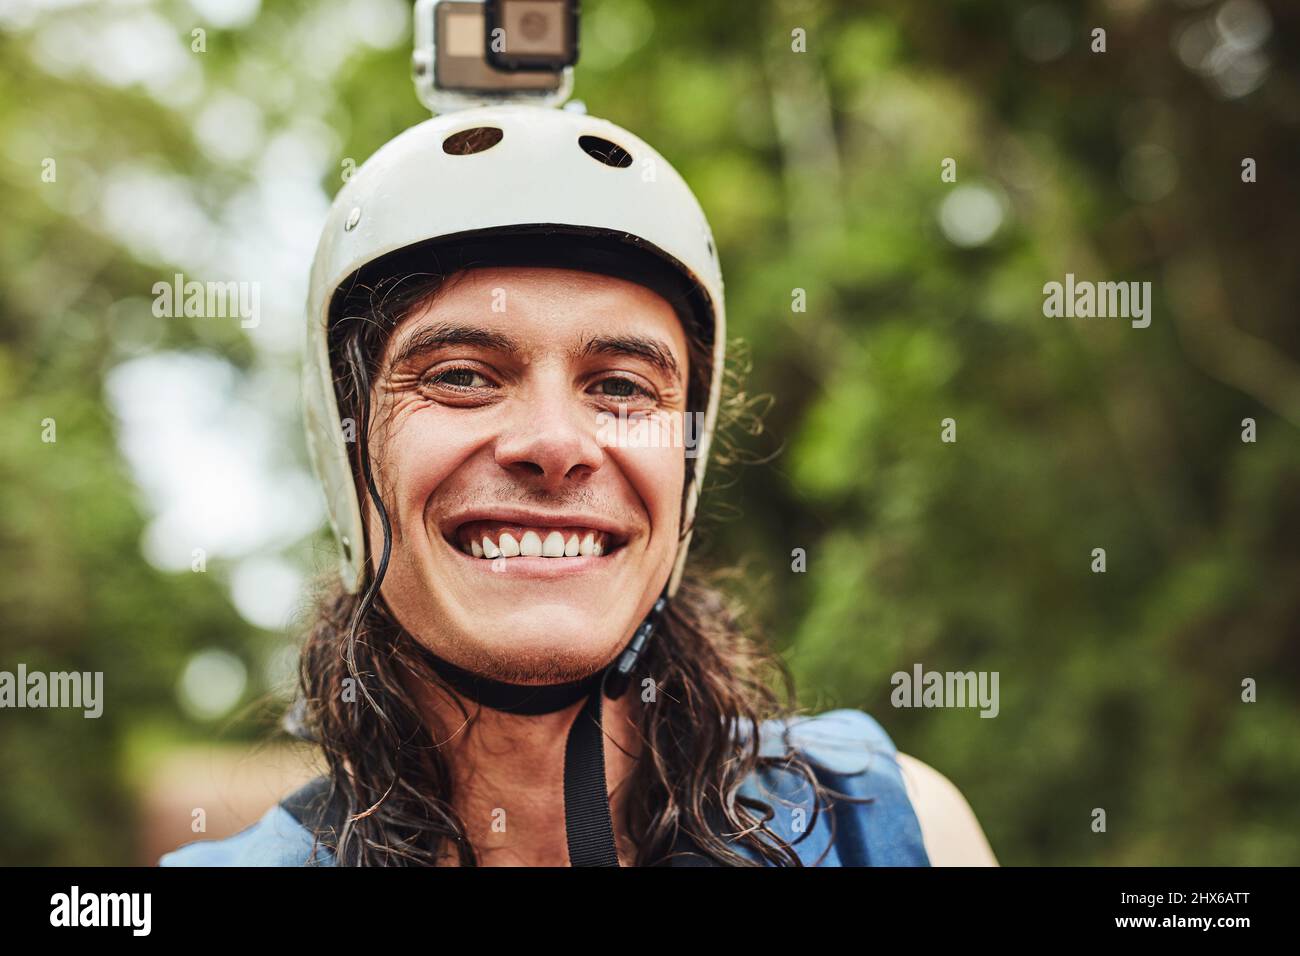 Im ready for an adventure. Cropped shot of an adventurous young man wearing a helmet with a action camera attached. Stock Photo